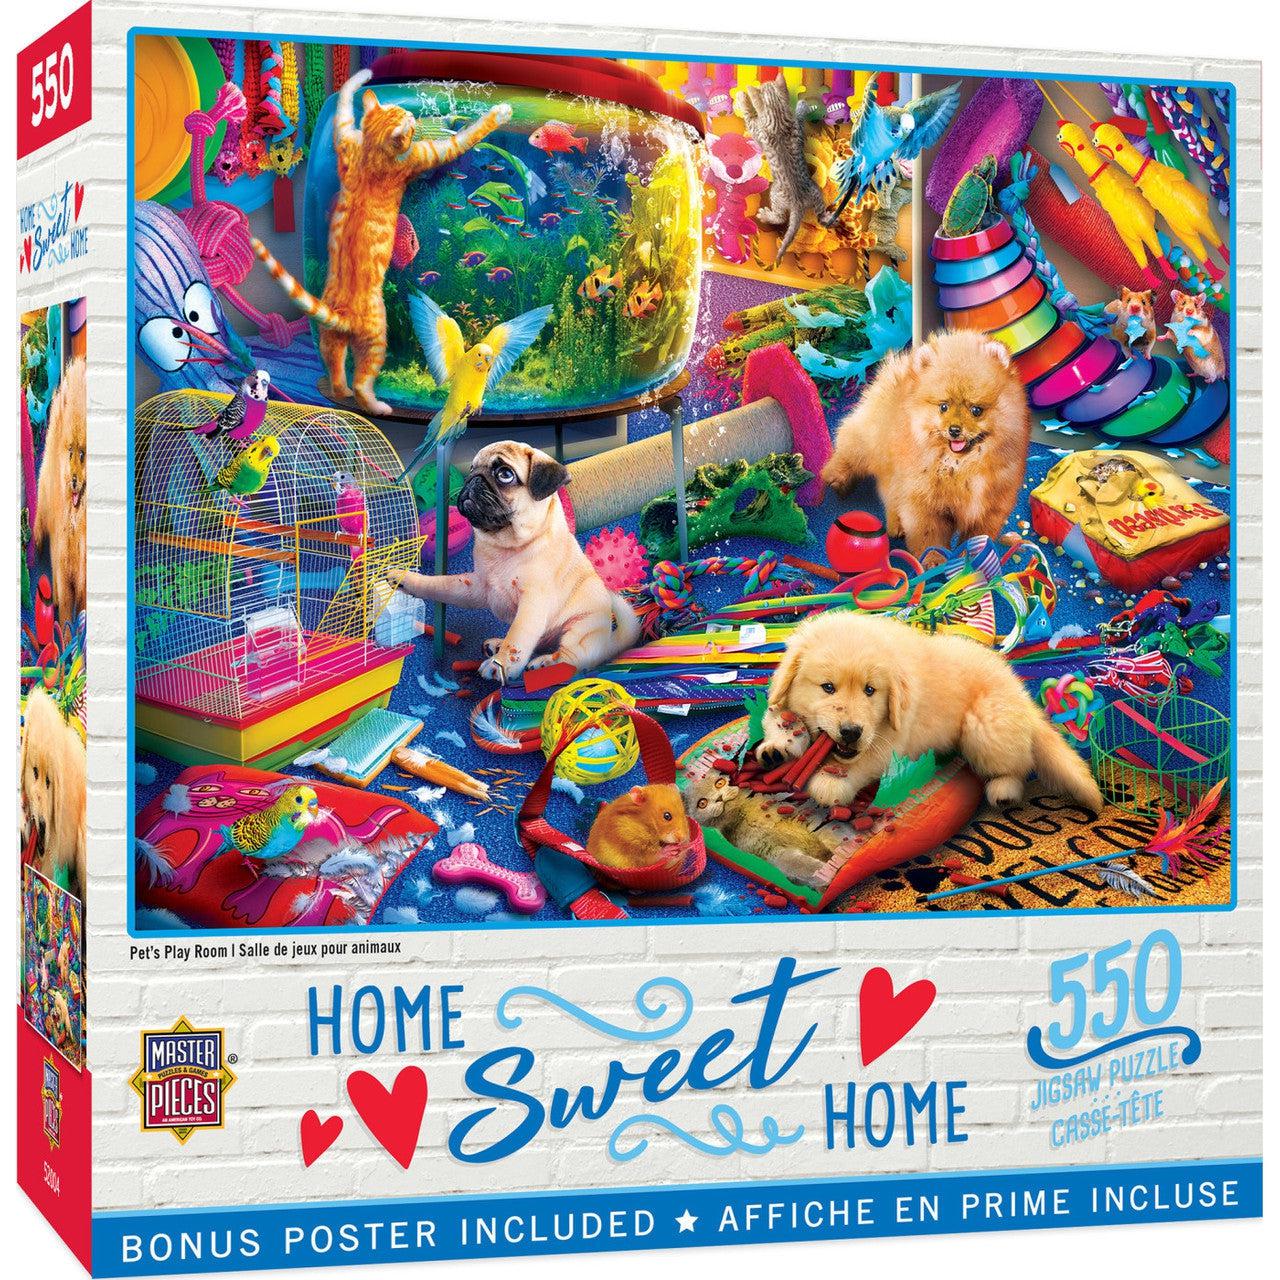 MasterPieces-Home Sweet Home - Pet's Play Room - 550 Piece Puzzle-32296-Legacy Toys